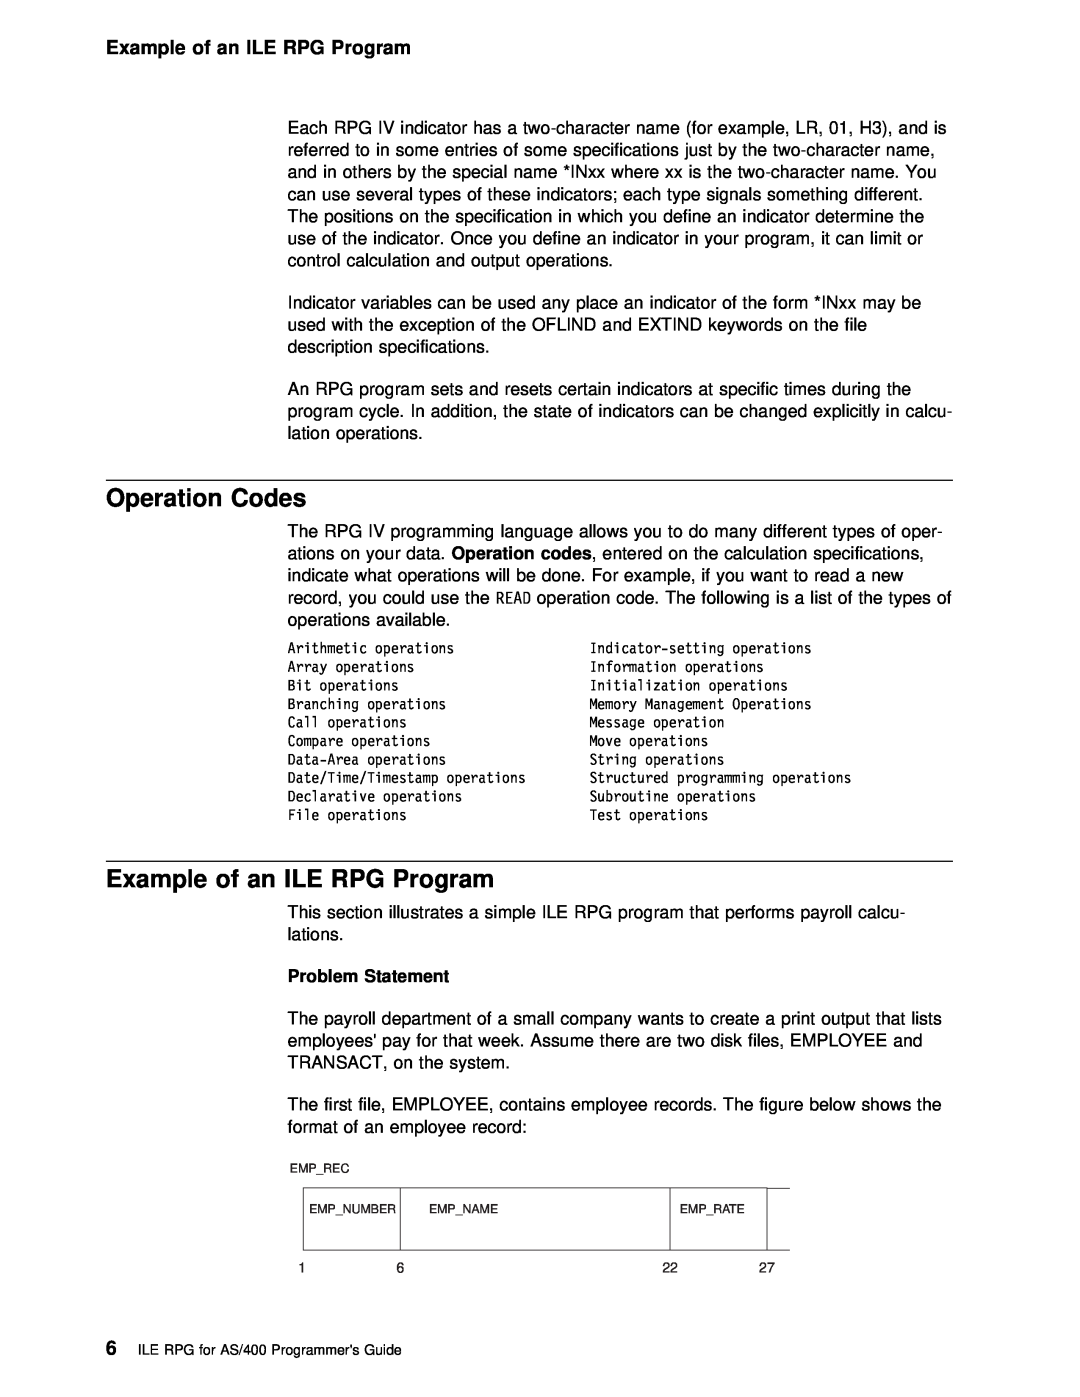 IBM AS/400 manual Operation Codes, Example of an ILE RPG Program 